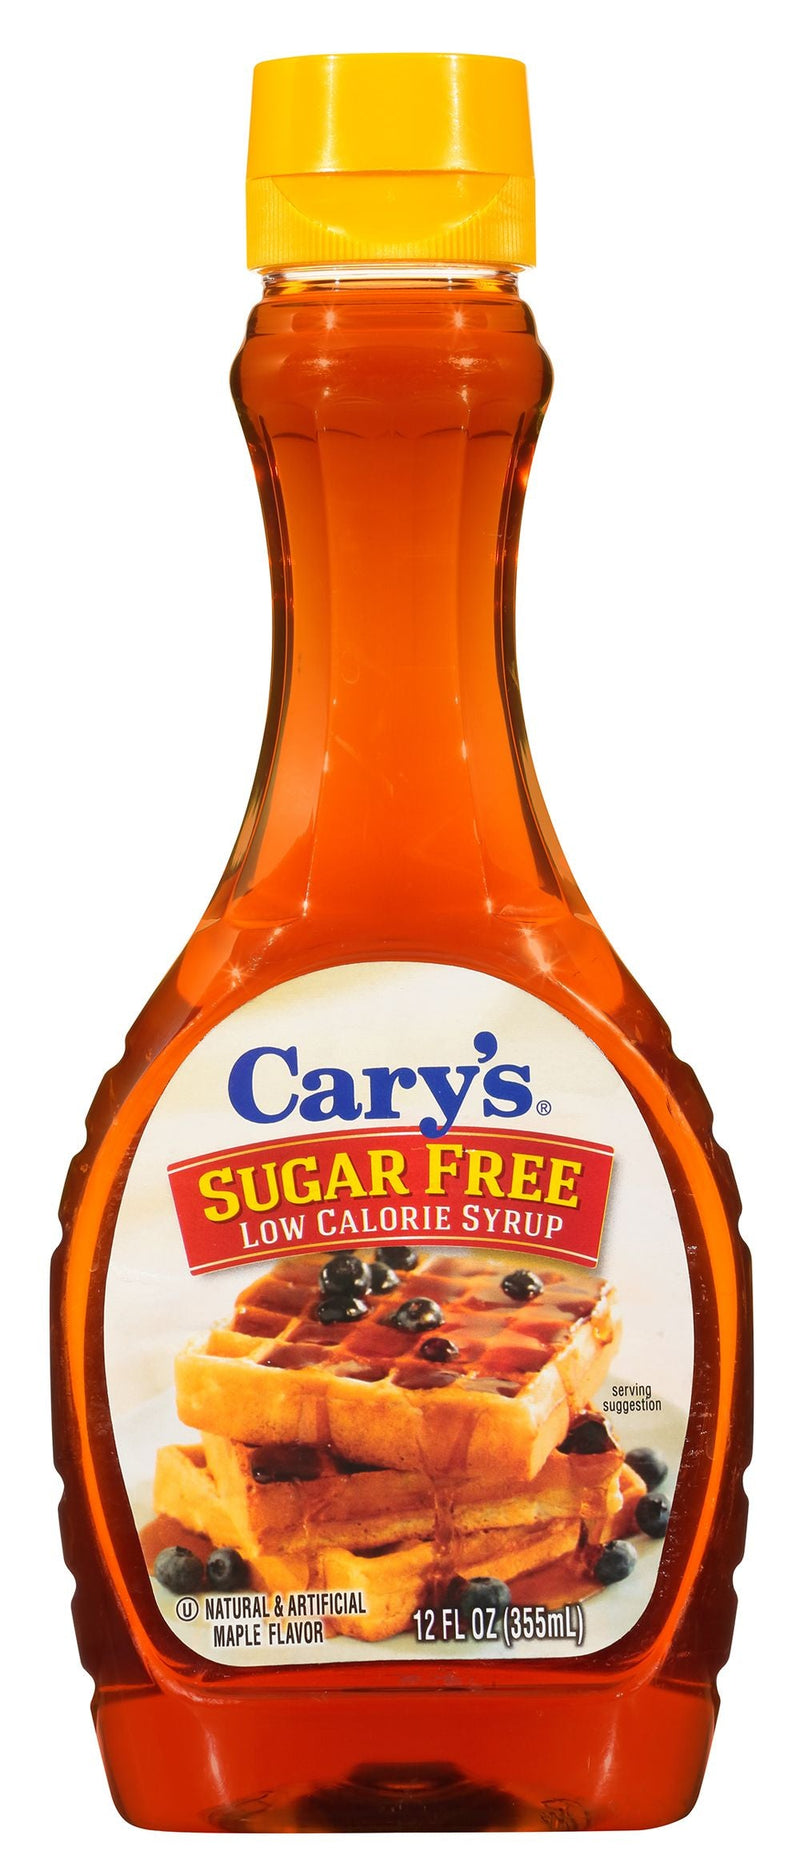 Cary's Sugar Free Low Calorie Syrup, Maple Flavored 12 fl oz - High-quality Breakfast Foods by Cary's at 